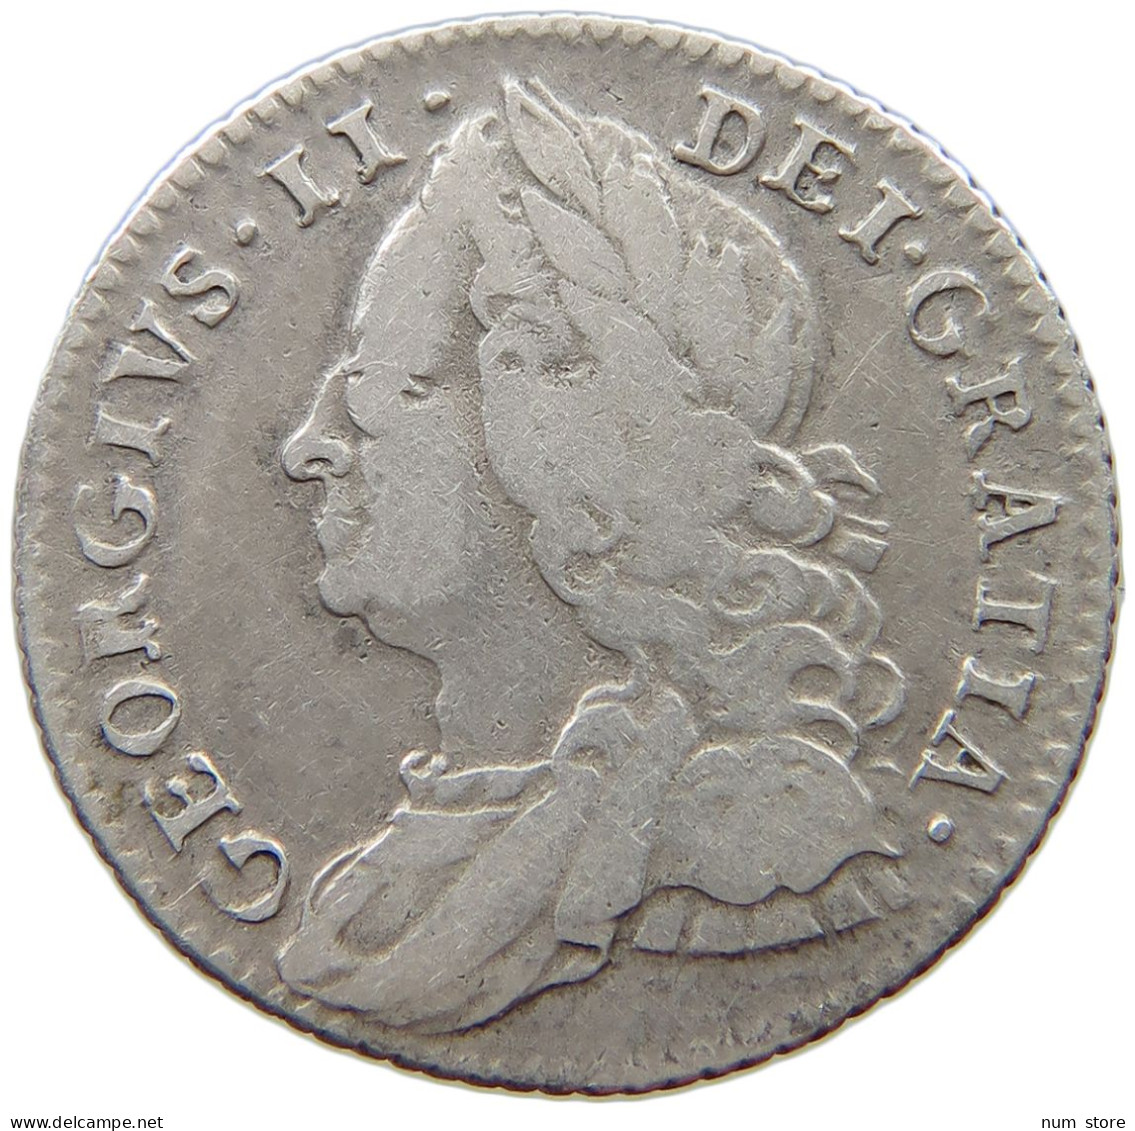 GREAT BRITAIN SIXPENCE 1757 George II. 1727-1760. #t148 0549 - G. 6 Pence